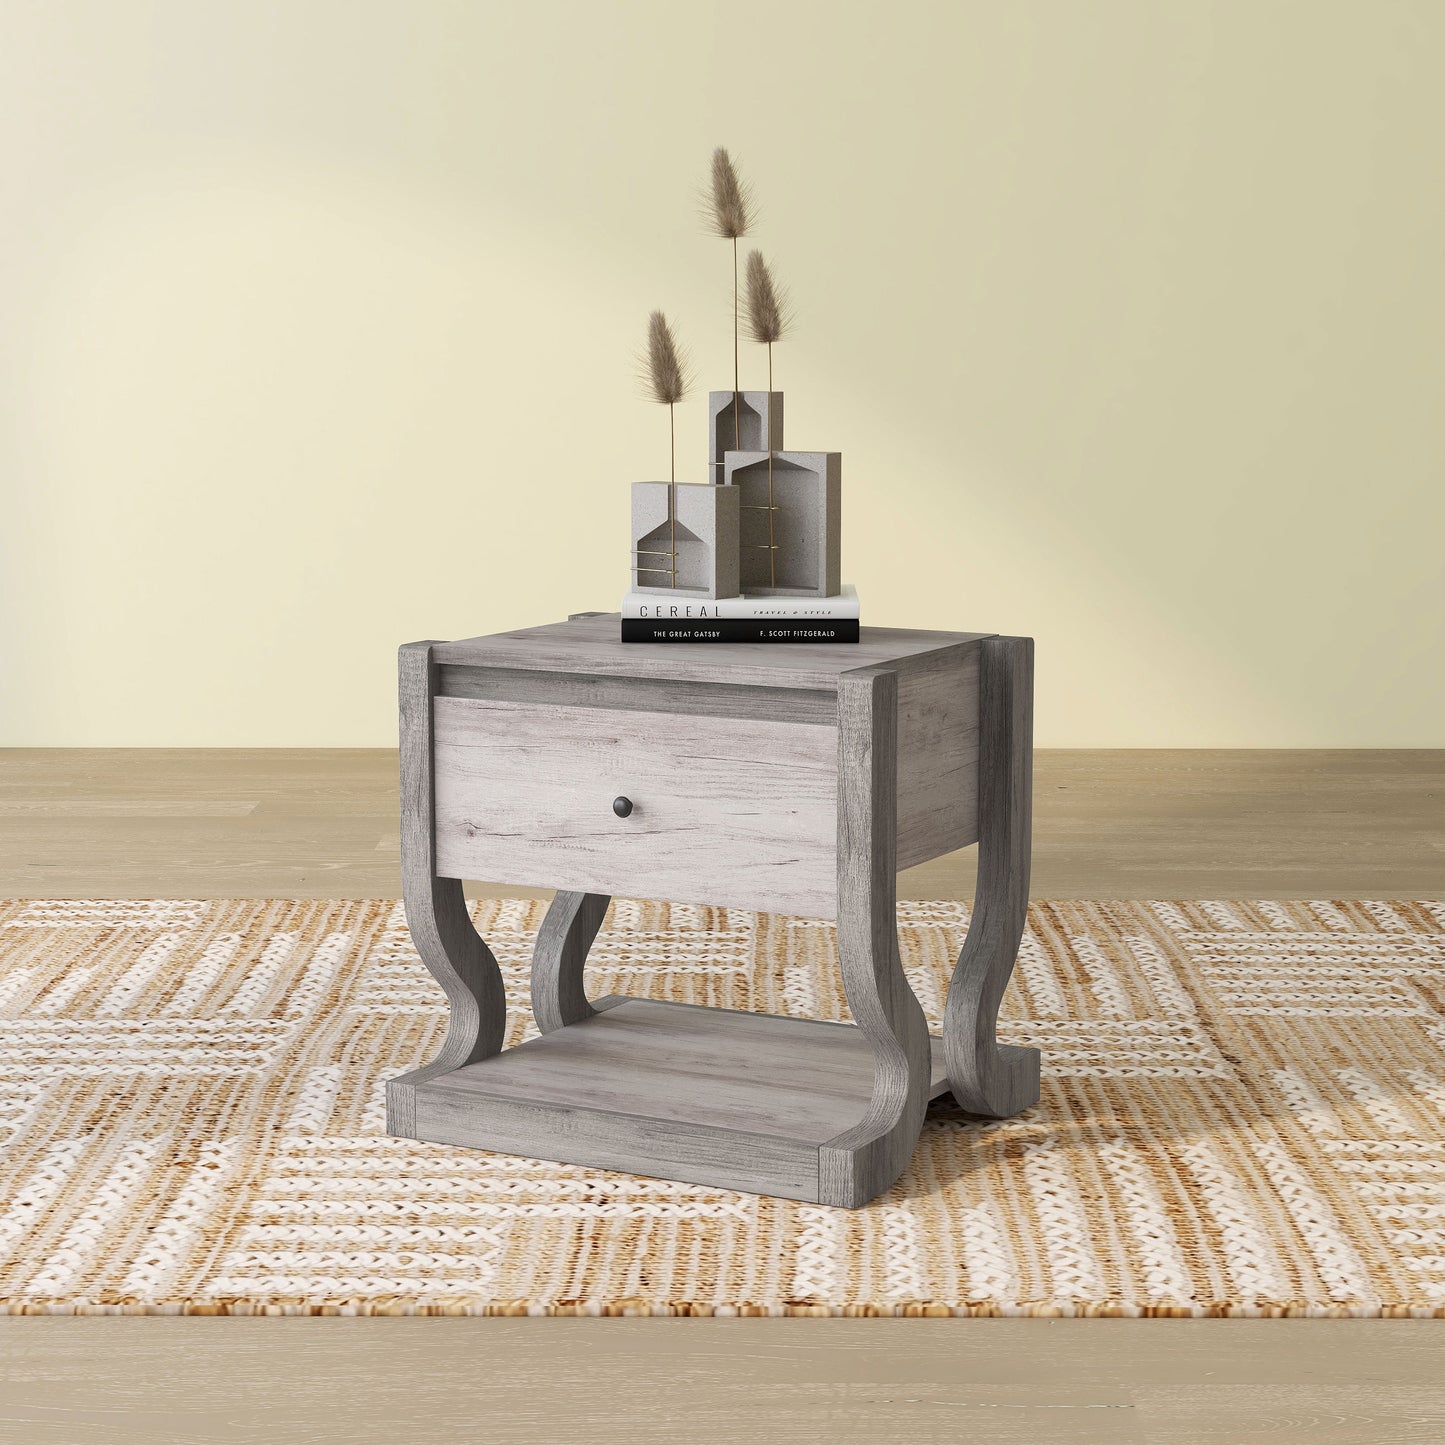 Left angled transitional coastal white one-drawer side table with a shelf on an area rug with accessories